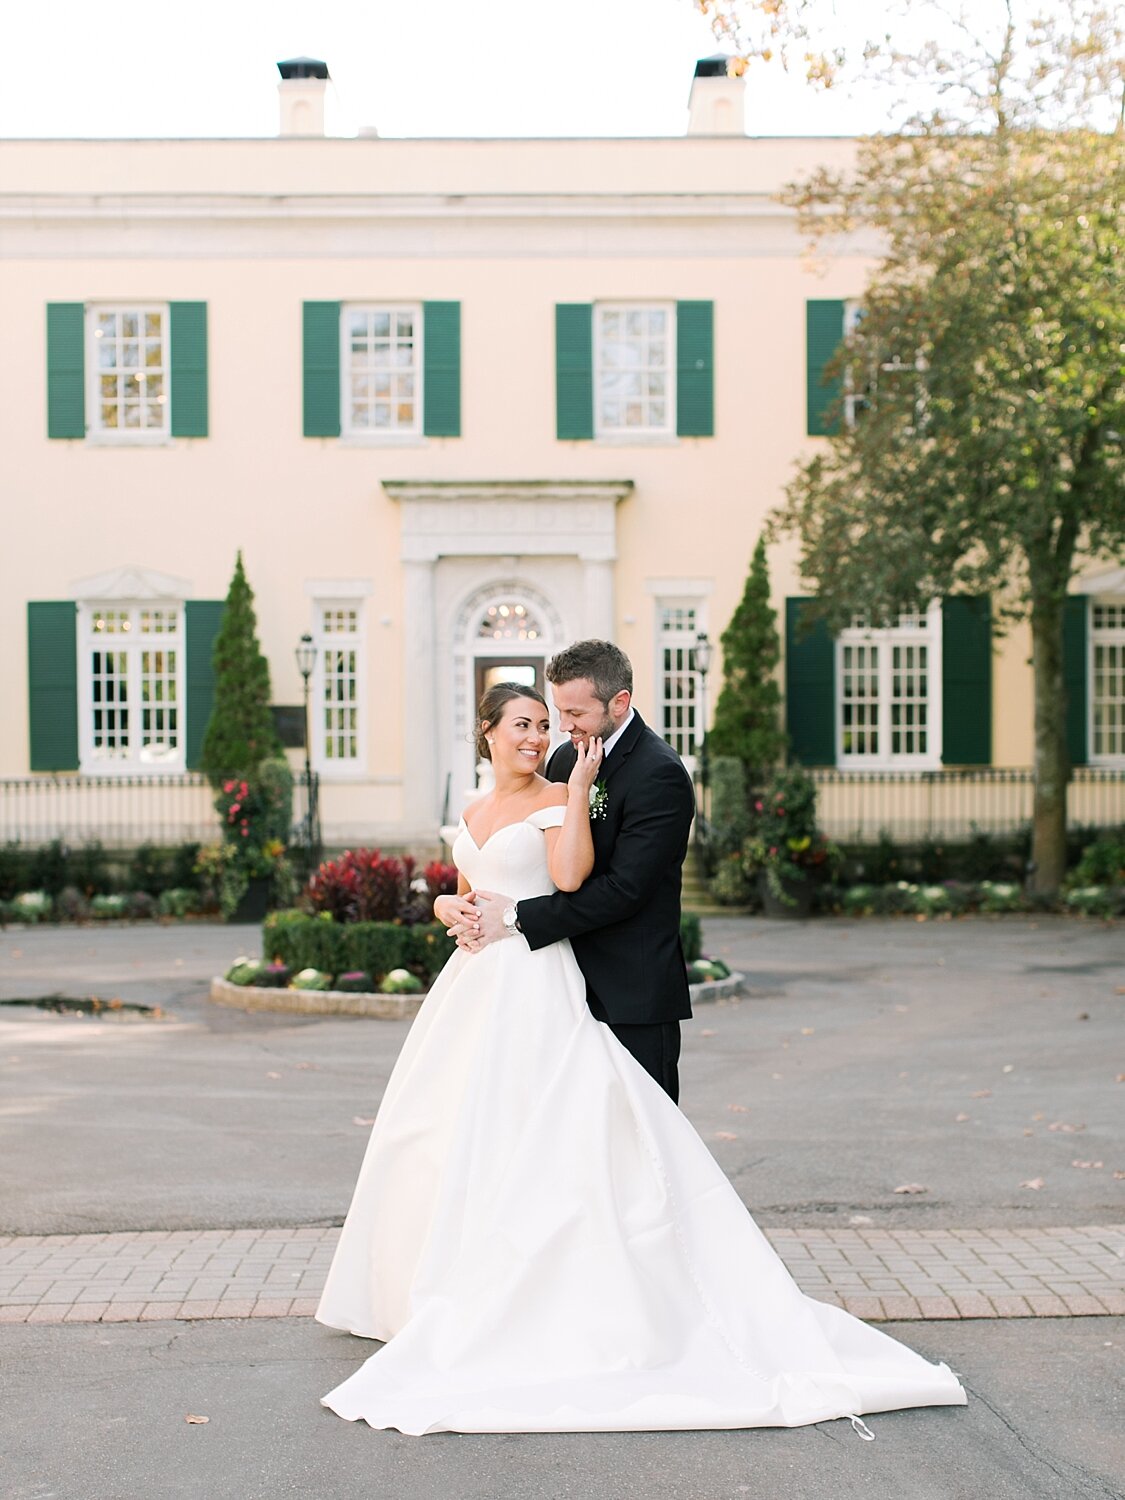 Oyster Bay wedding photography by Asher Gardner Photography